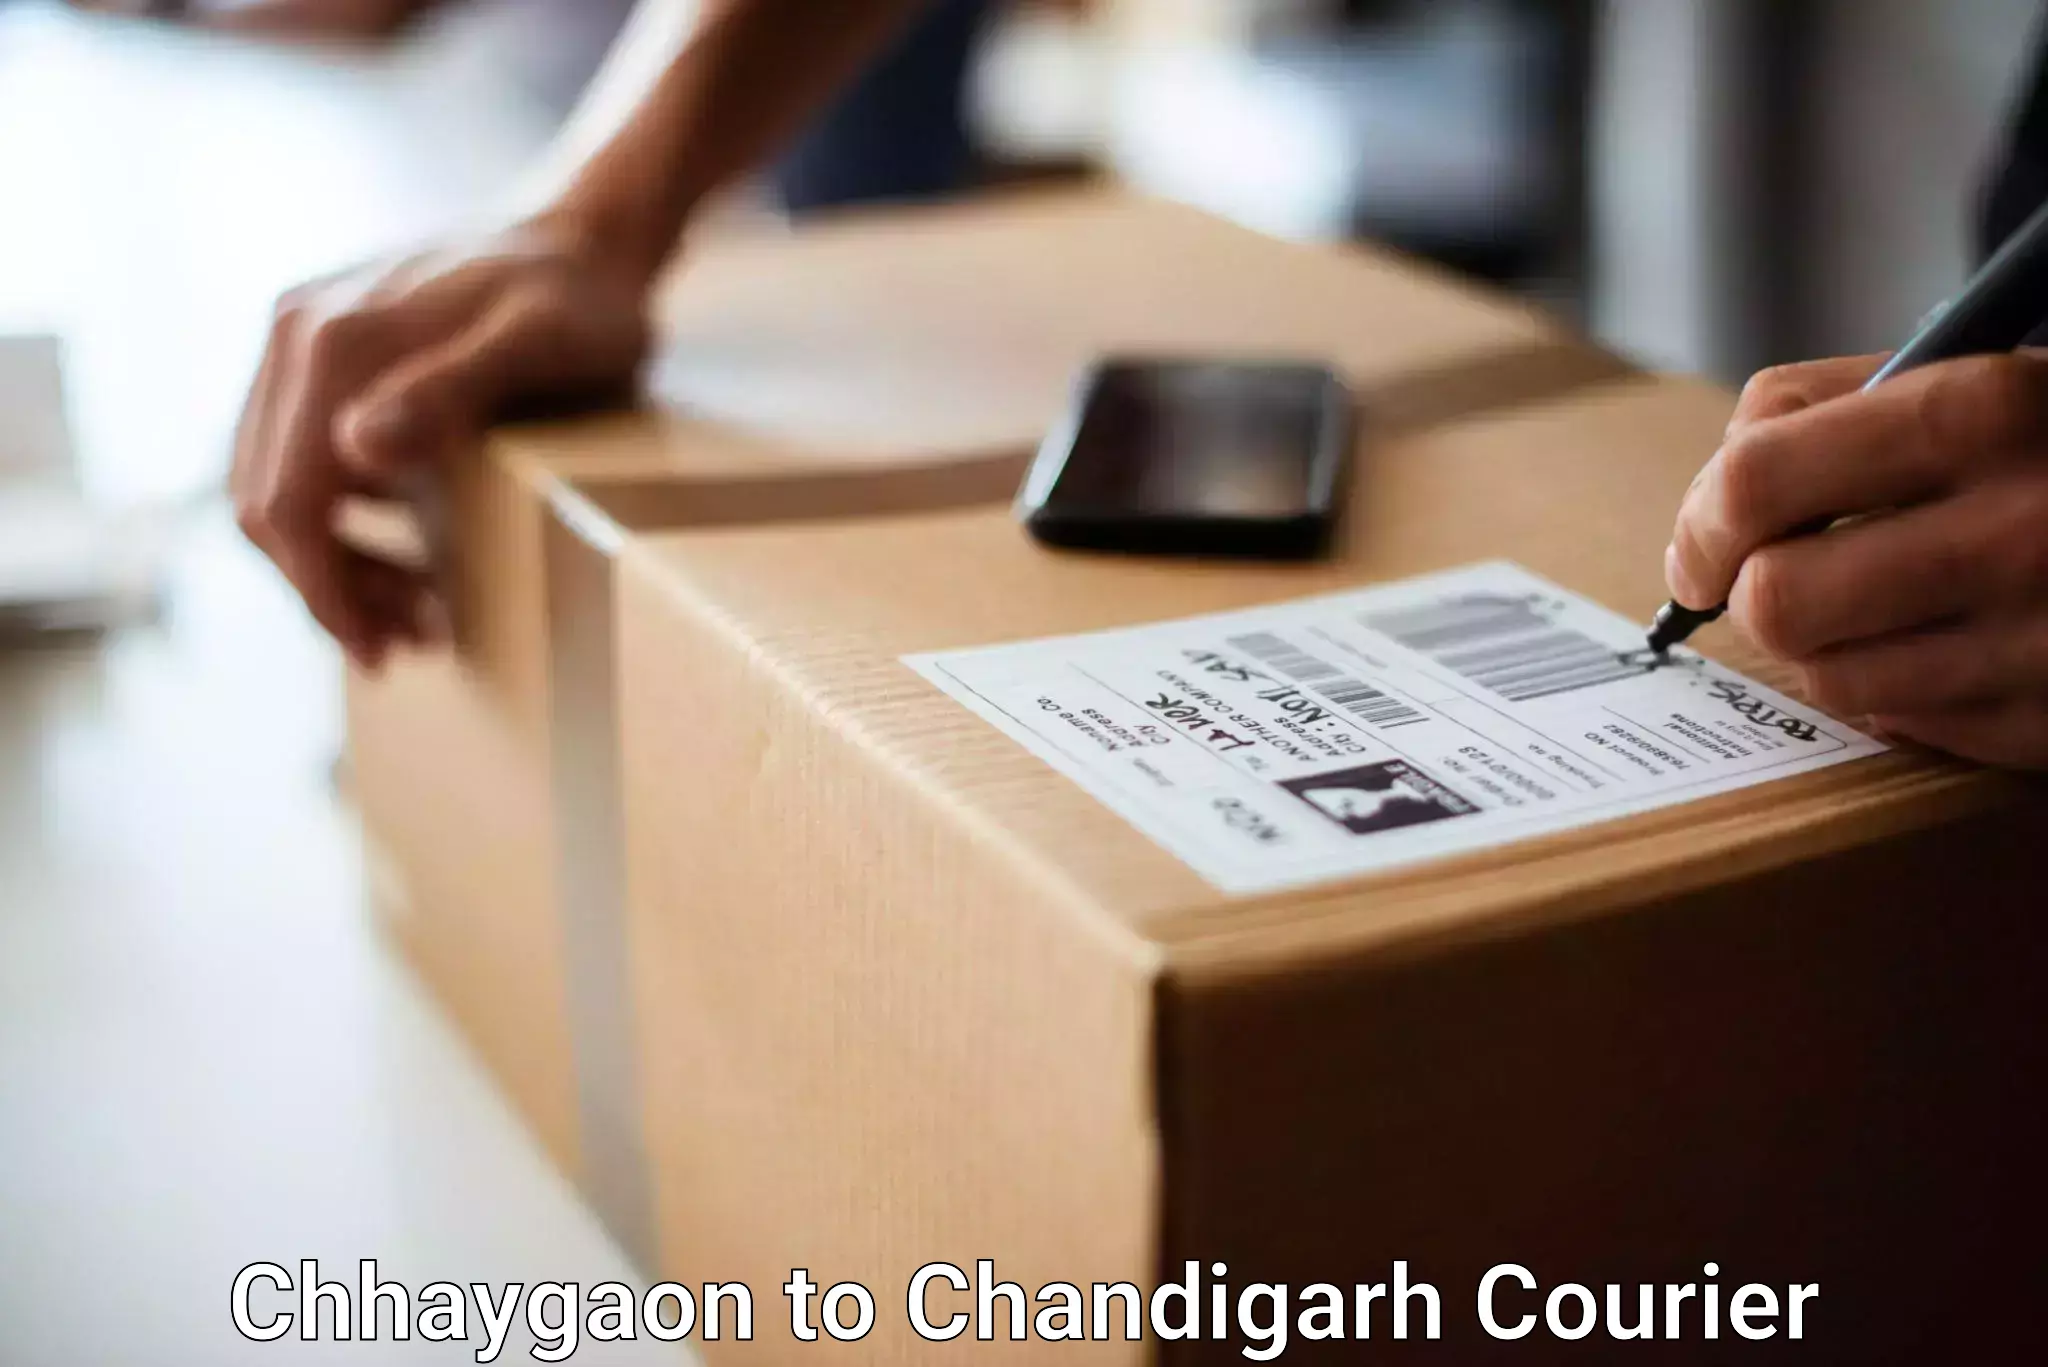 Baggage transport innovation Chhaygaon to Chandigarh